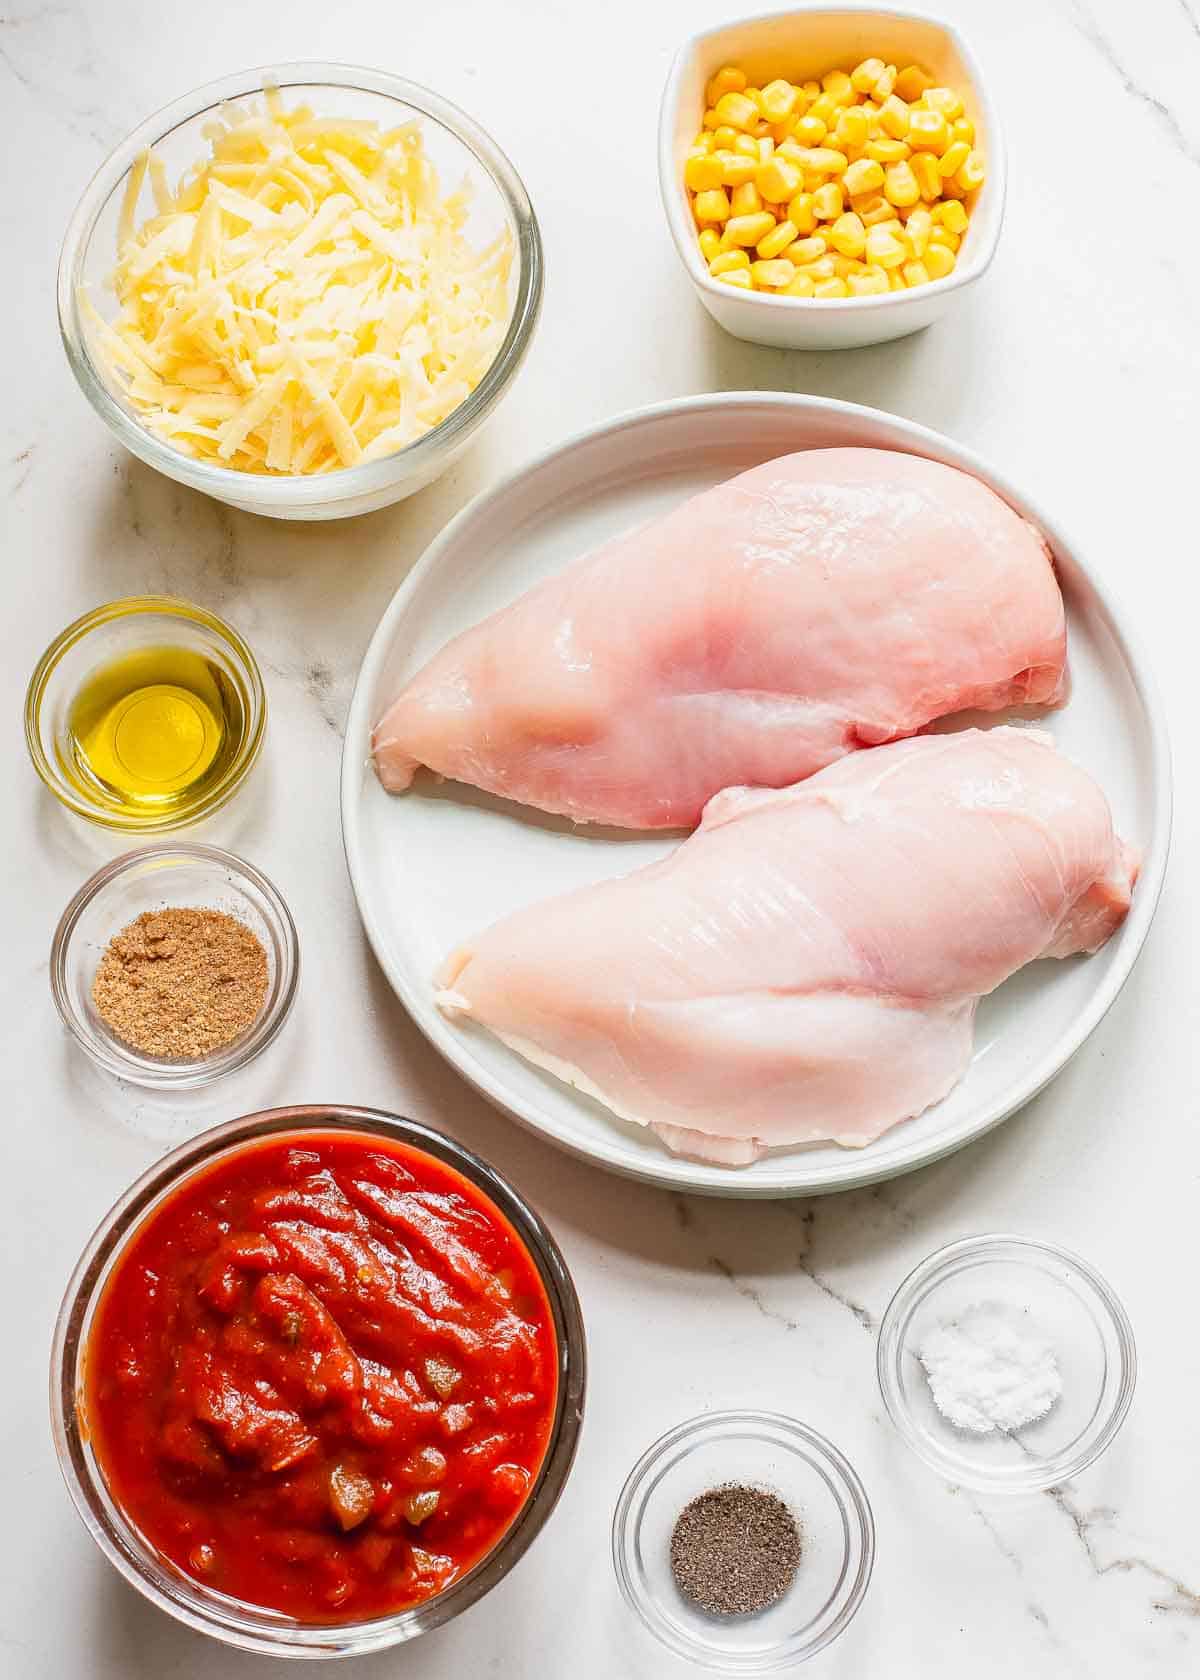 Chicken breasts, corn, tomatoes and other ingredients on a white marble table.